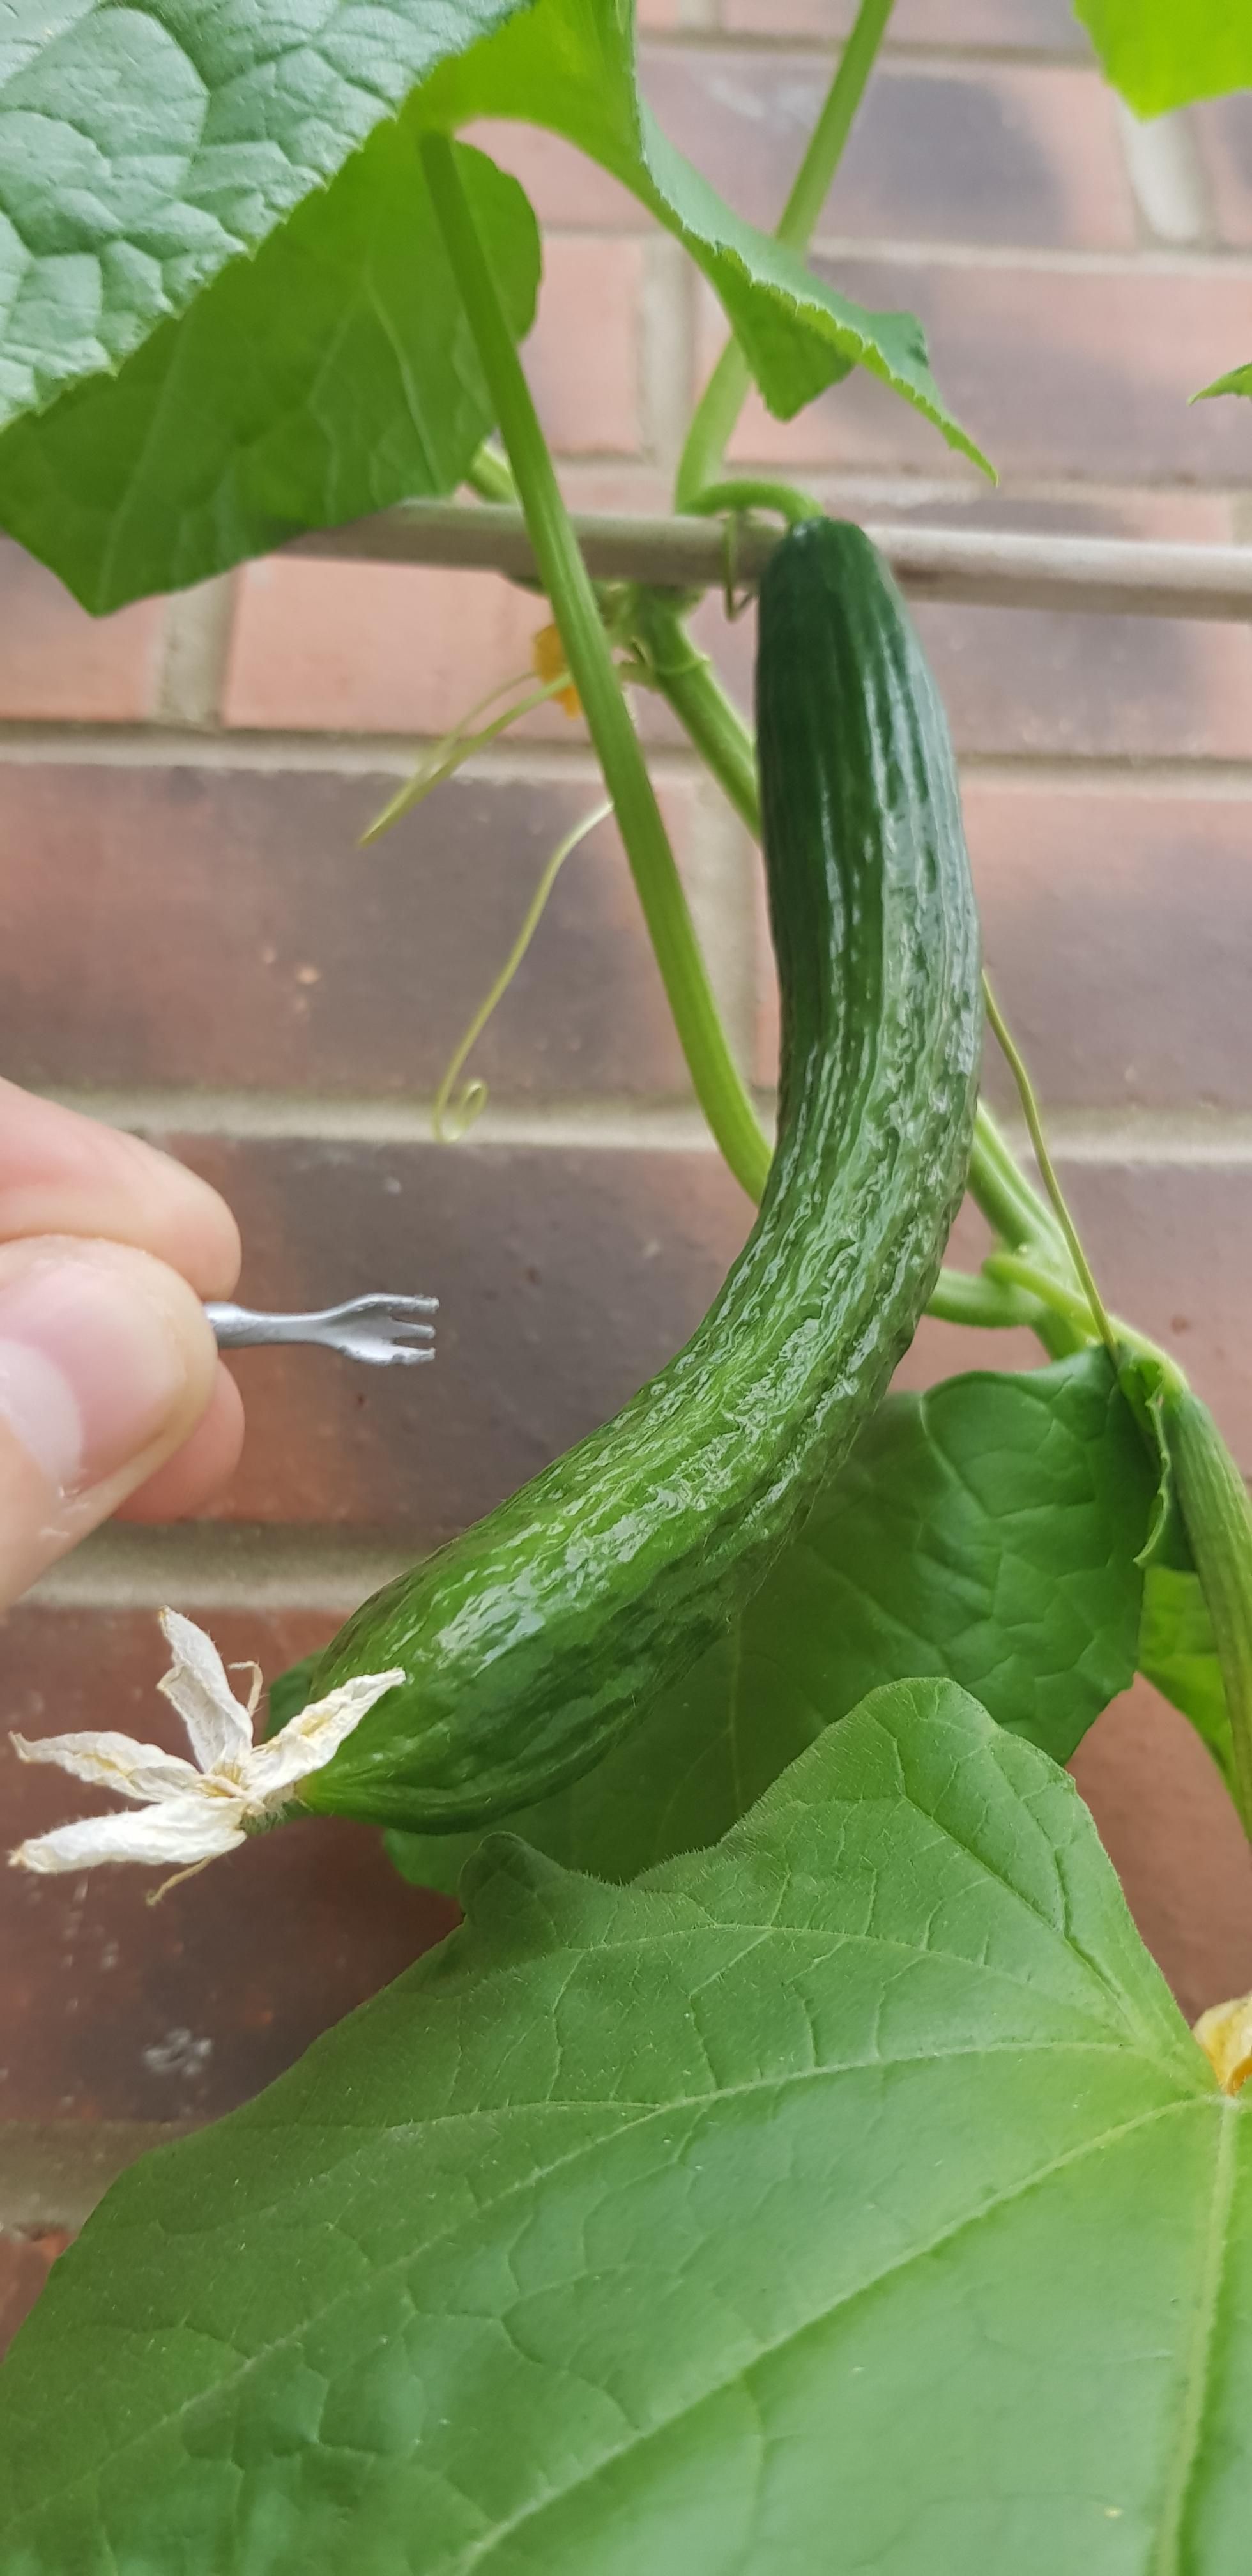 My cucumbers are getting big! Fork for scale.